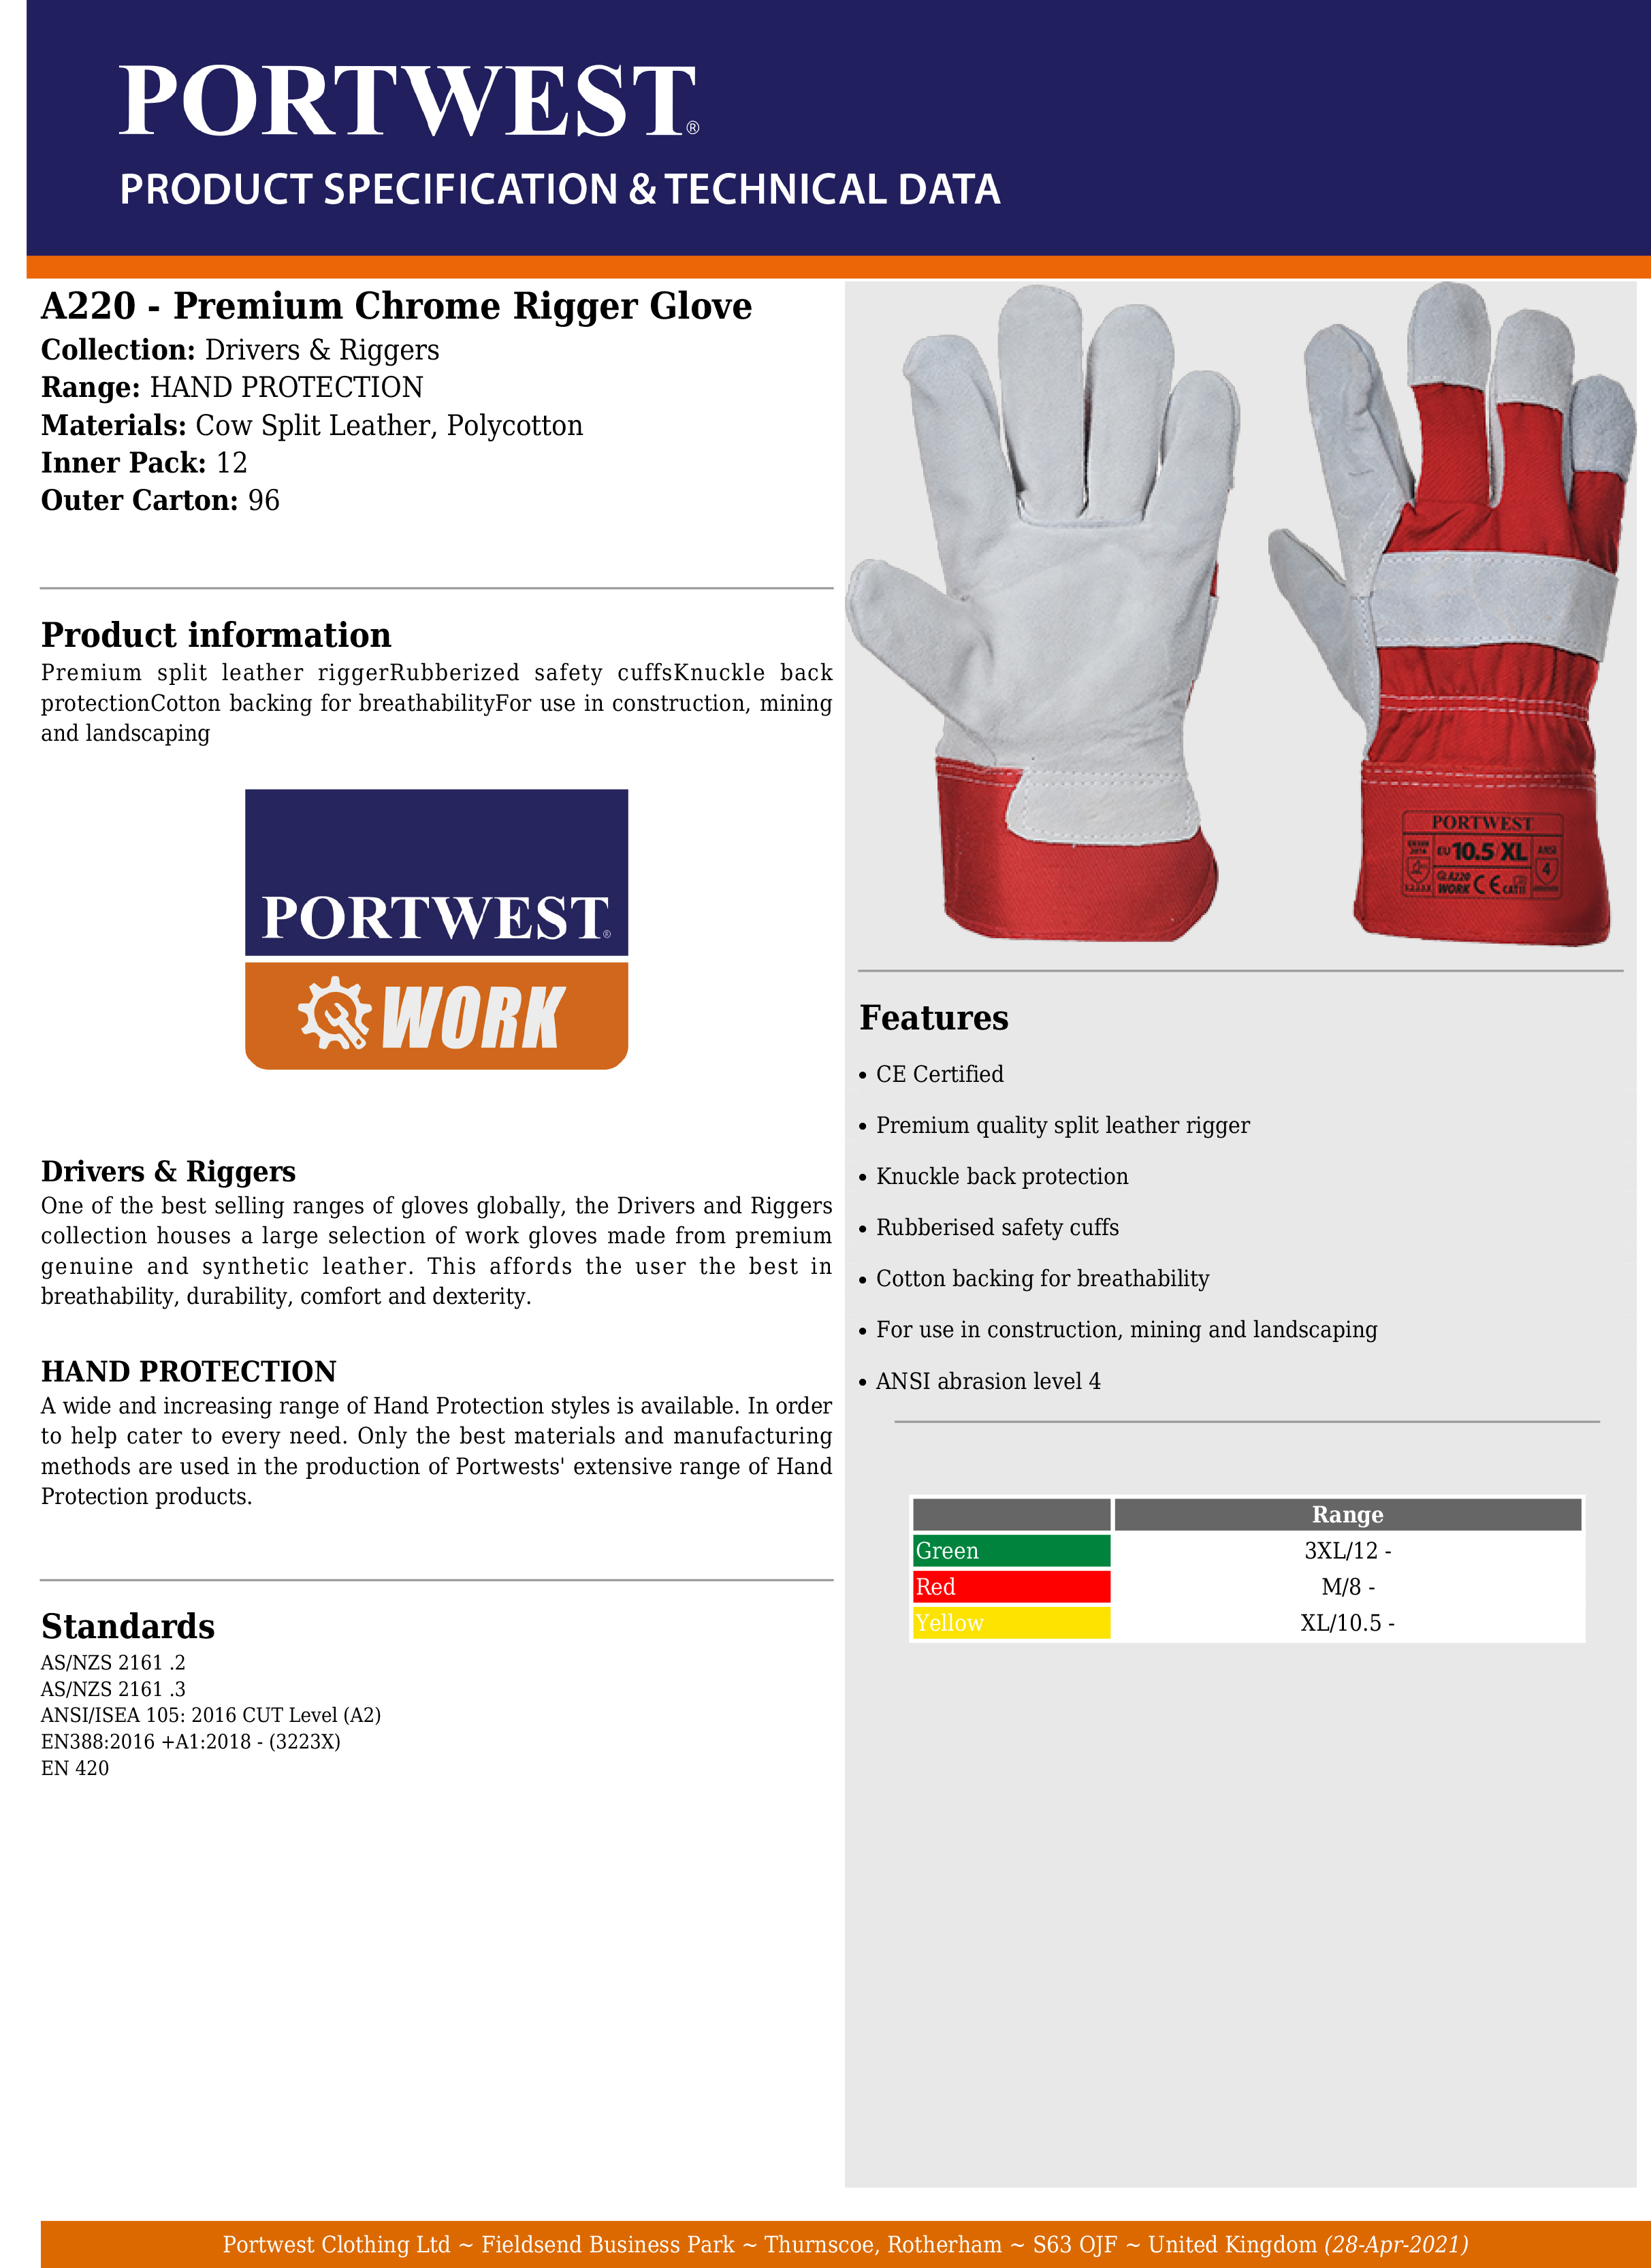 Industrial Work Gloves - Safety Workwear Selection